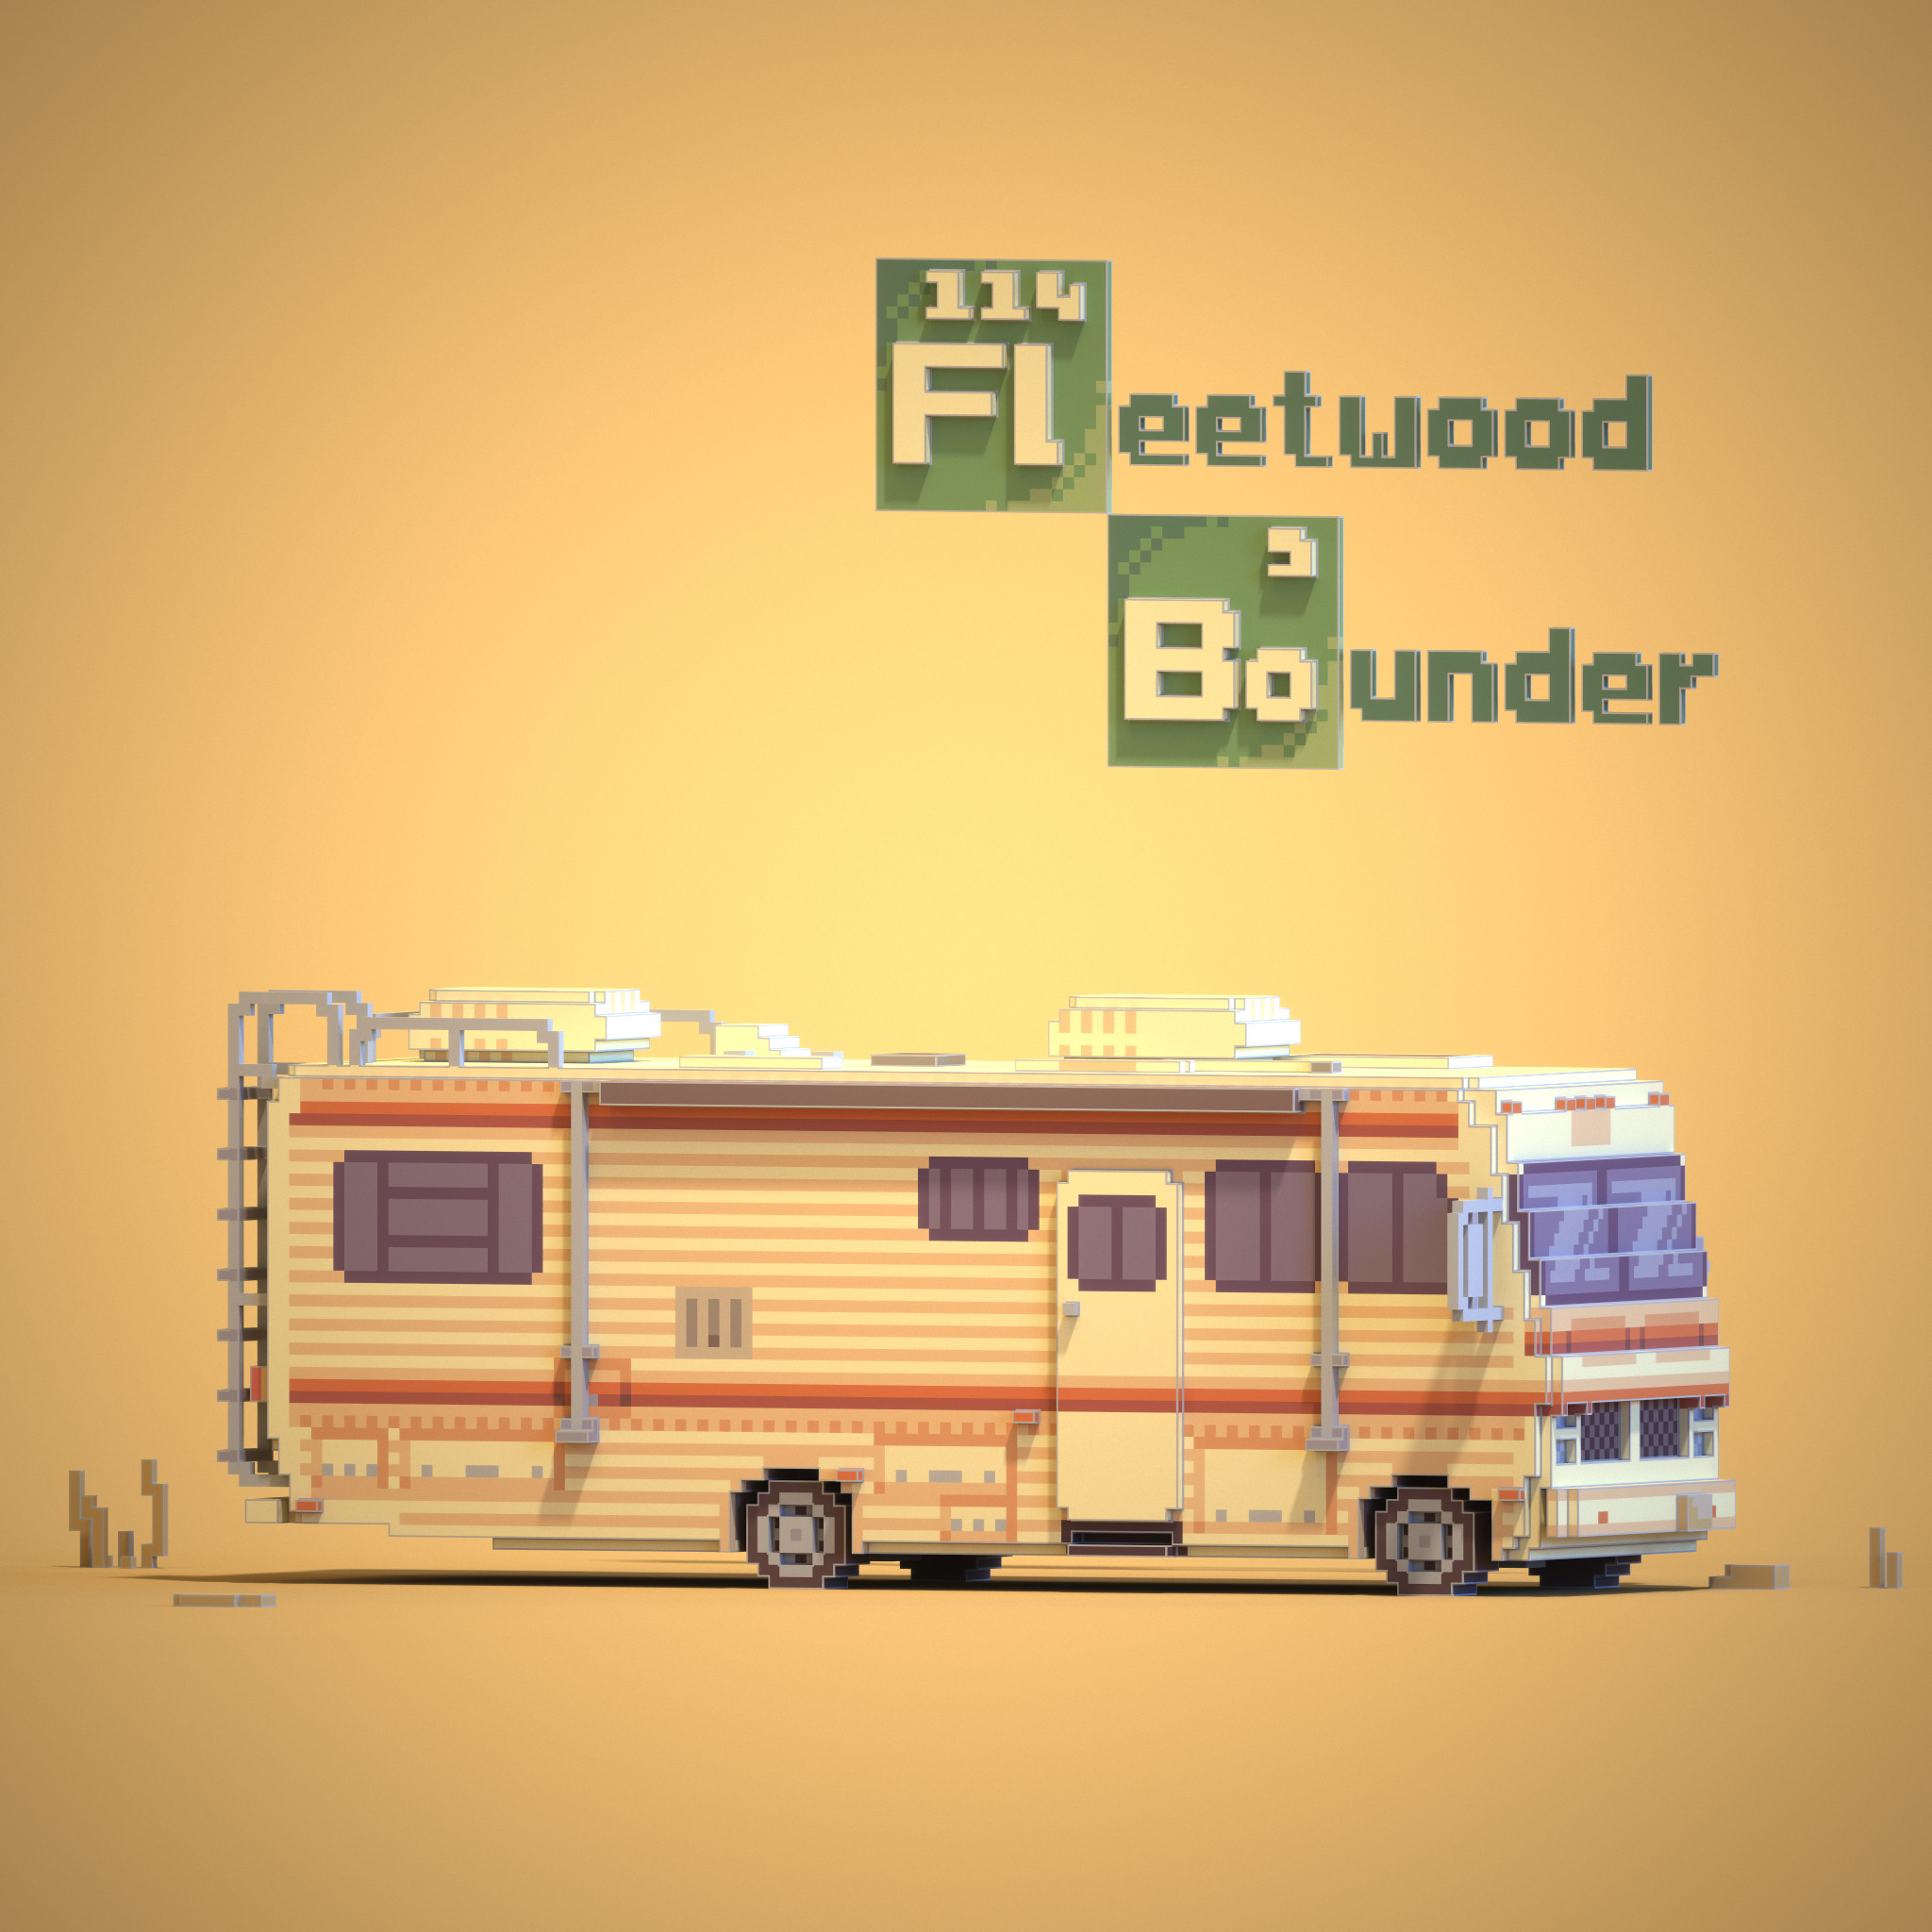 Voxel model rendering of the Fleetwood Bounder Recreational Vehicle as seen in the television series Breaking Bad.